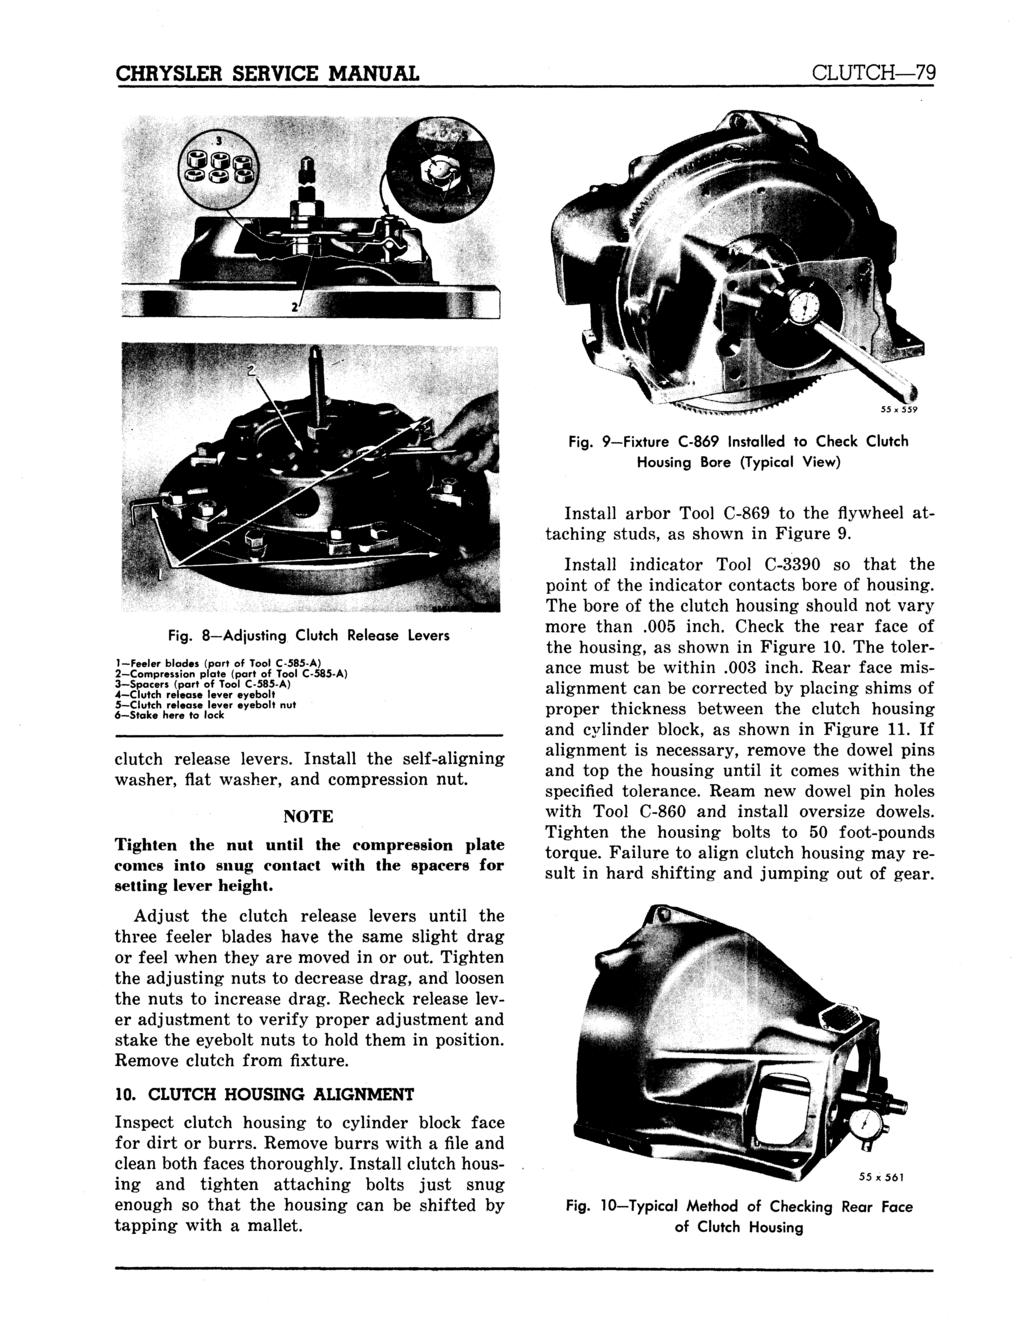 CLUTCH 79 Fig. 9 Fixture C-869 Installed to Check Clutch Housing Bore (Typical View) Fig.